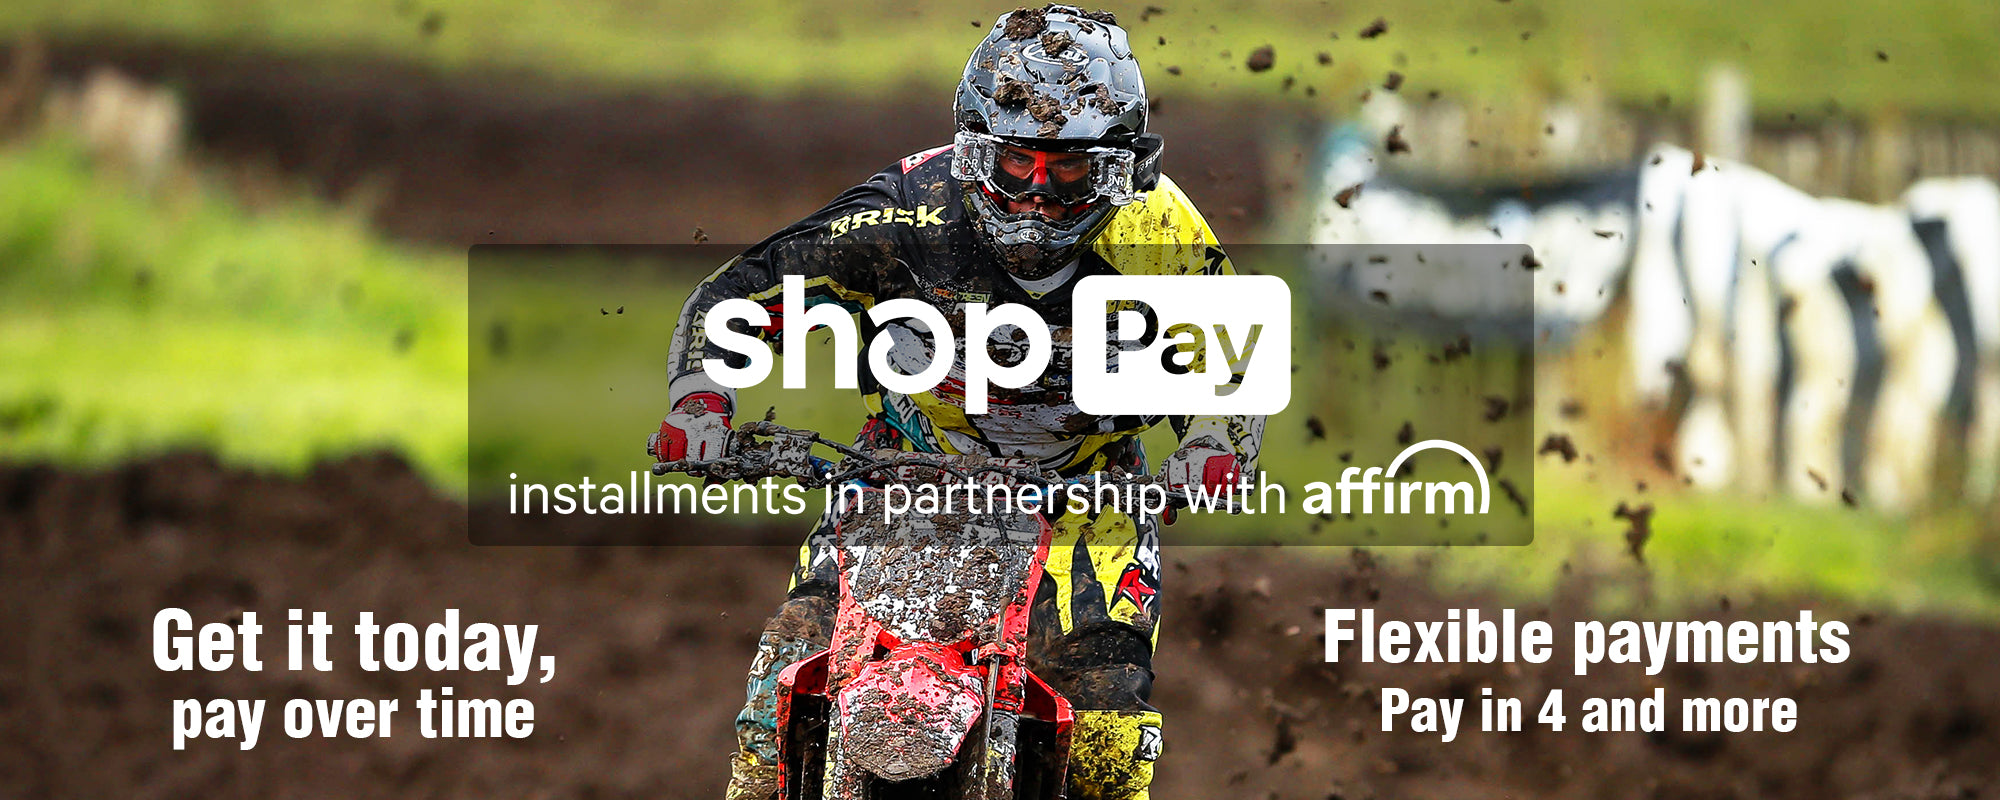 Shop Pay banner text reads: installments in partnership with affirm. get it today, pay over time. flexible payments, pay in 4 and more. Muddy motocross scene in the background